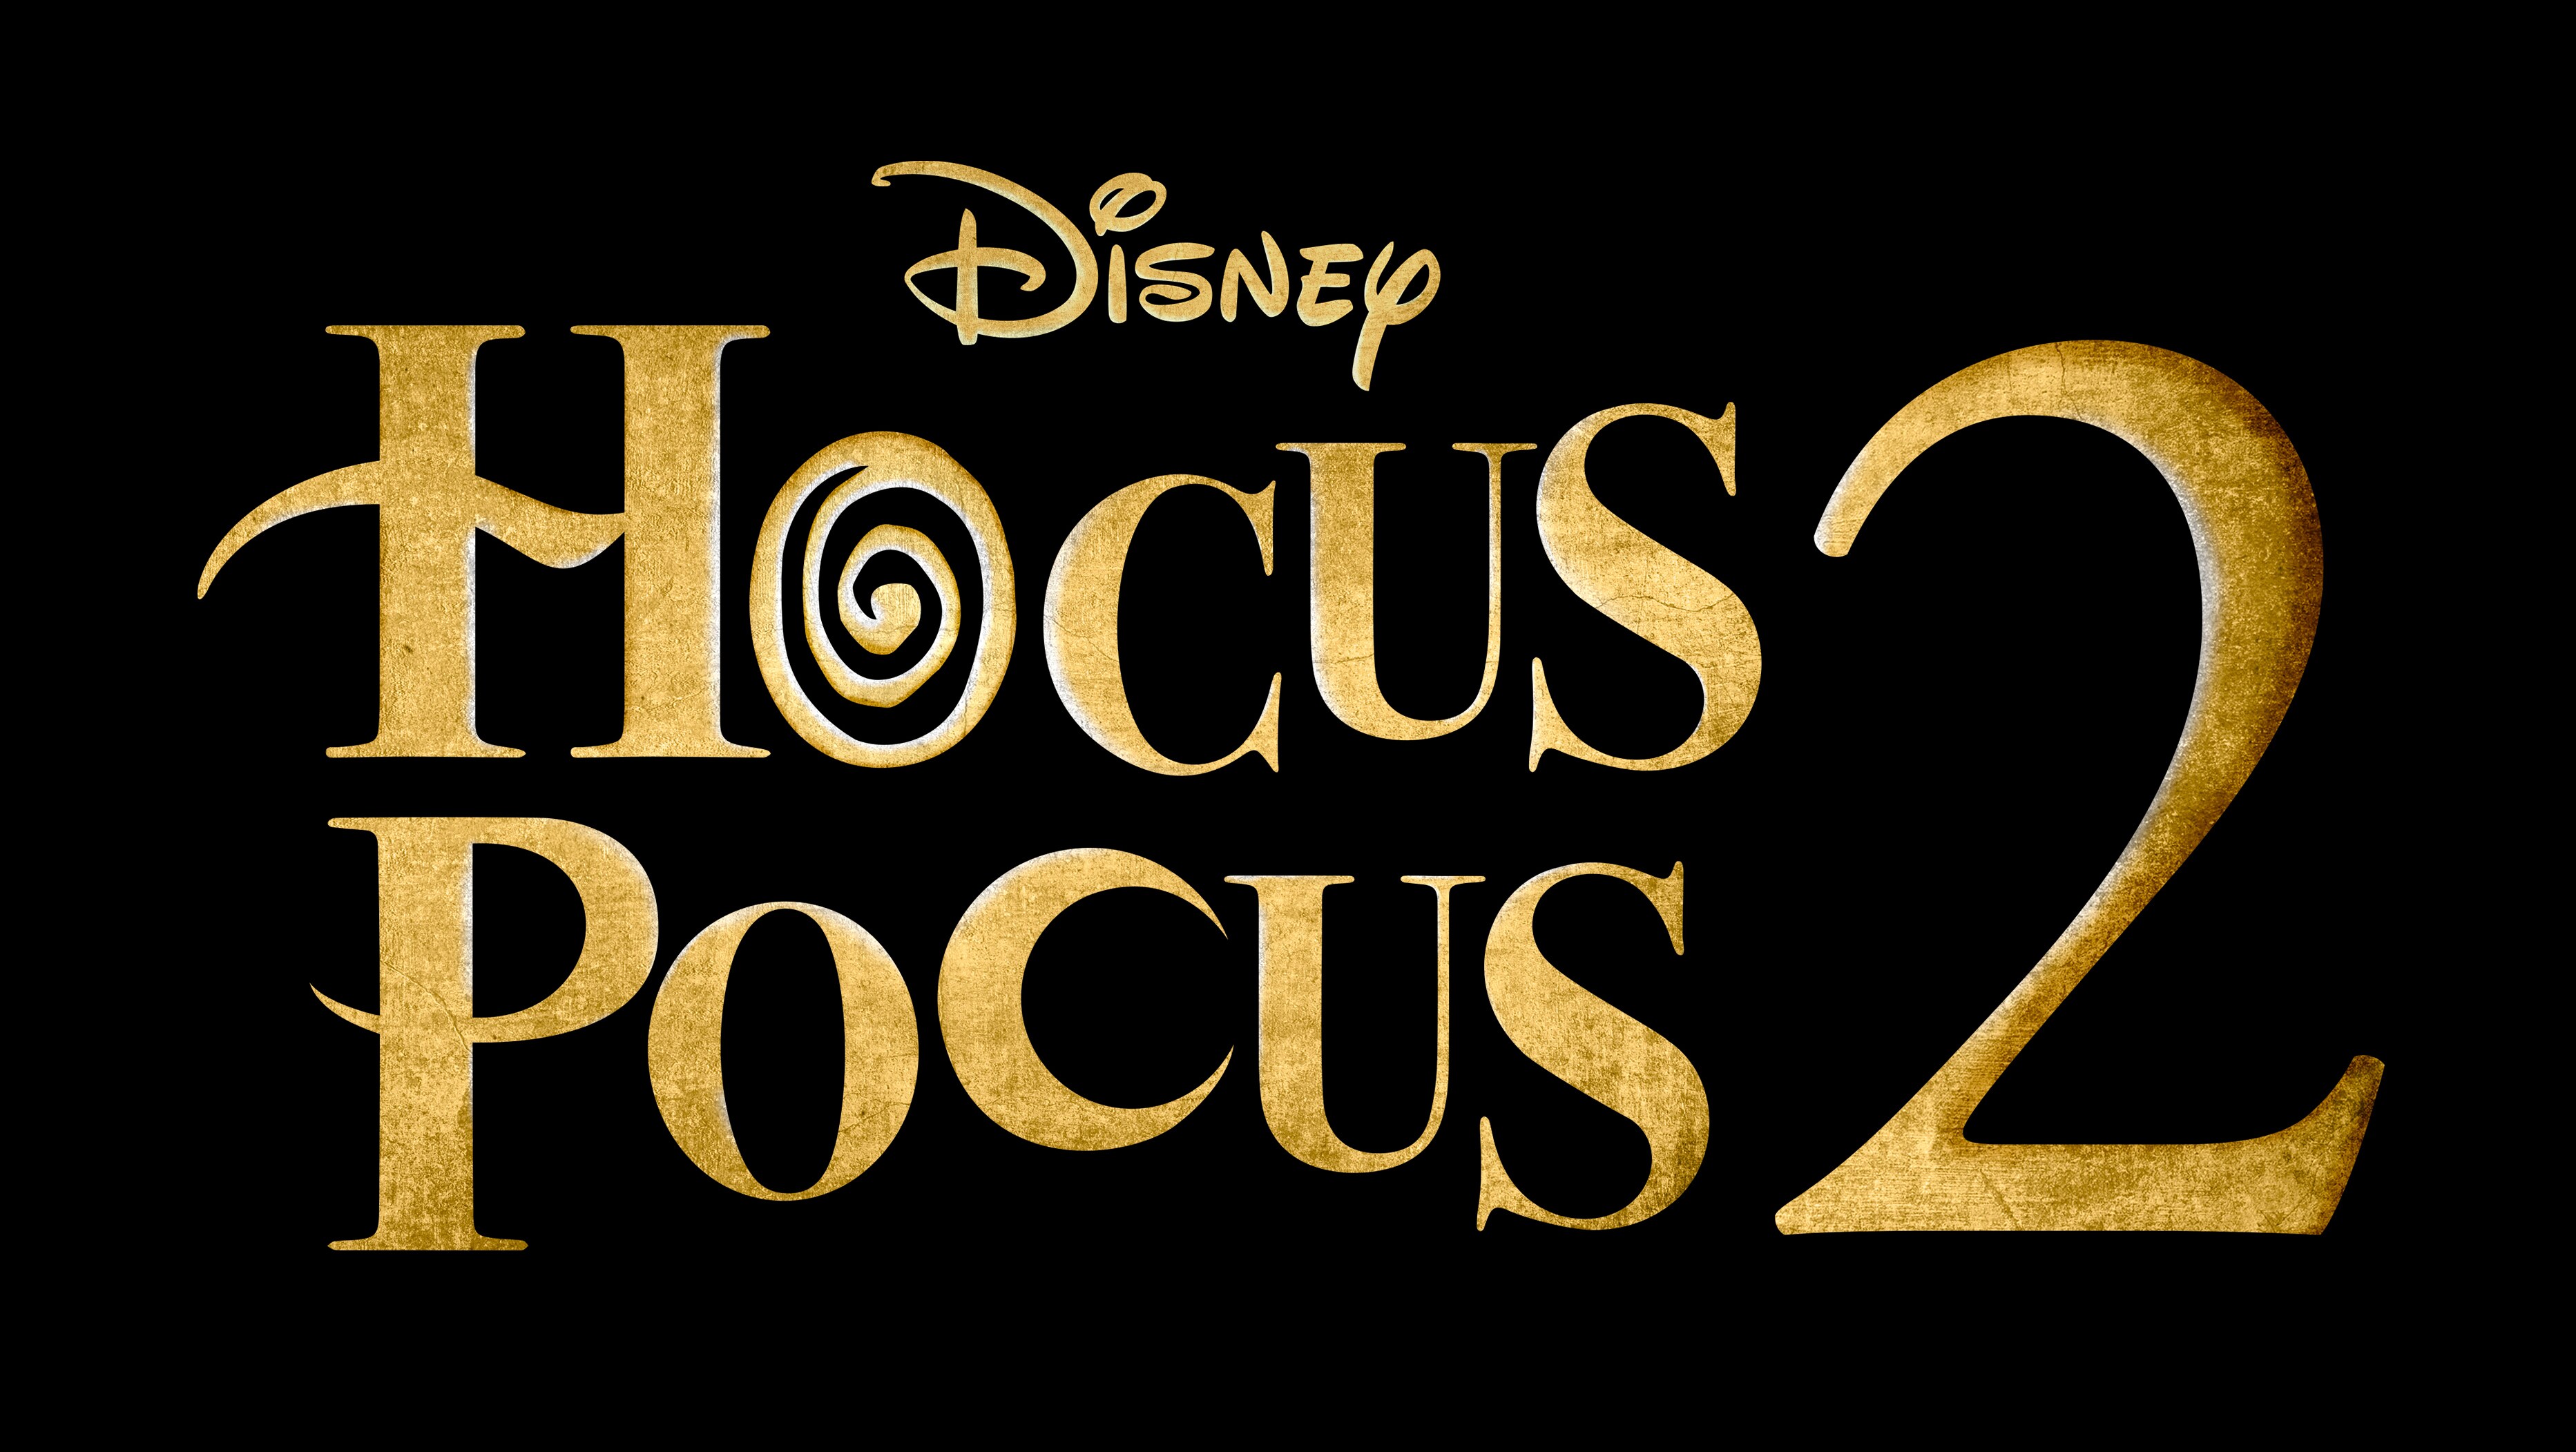 Bette Midler, Sarah Jessica Parker And Kathy Najimy Set To Conjure Up More Chills, Laughs And Mayhem In Live-Action Comedy “Hocus Pocus 2”